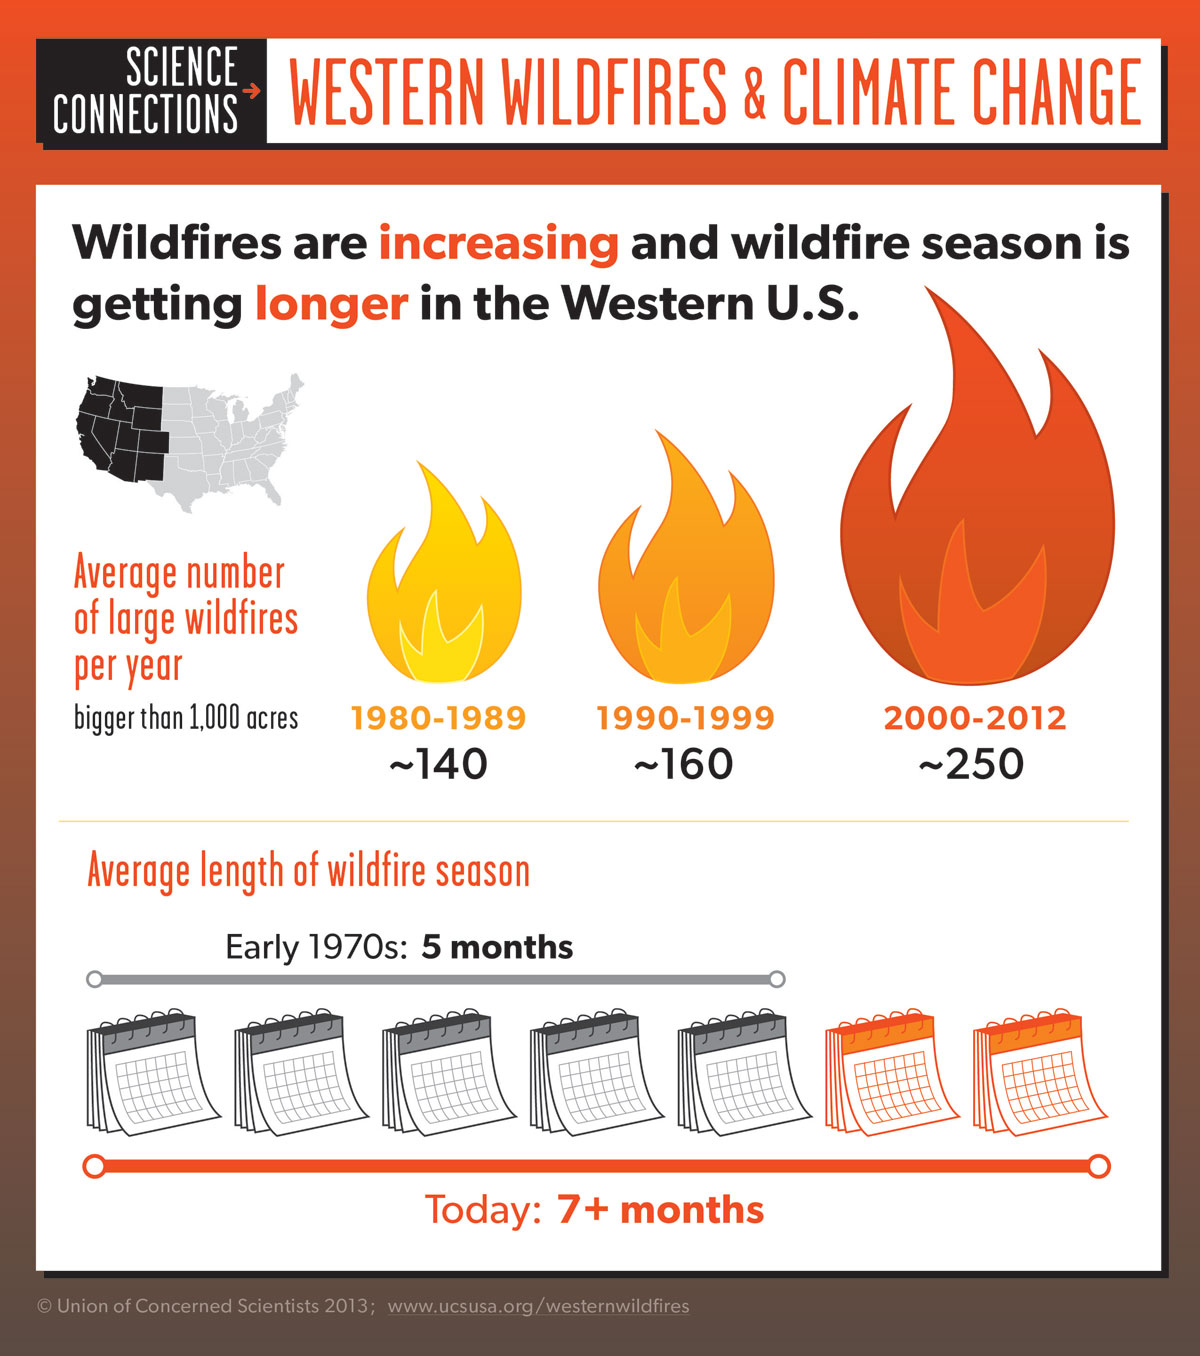 Climate Change and Wildfires